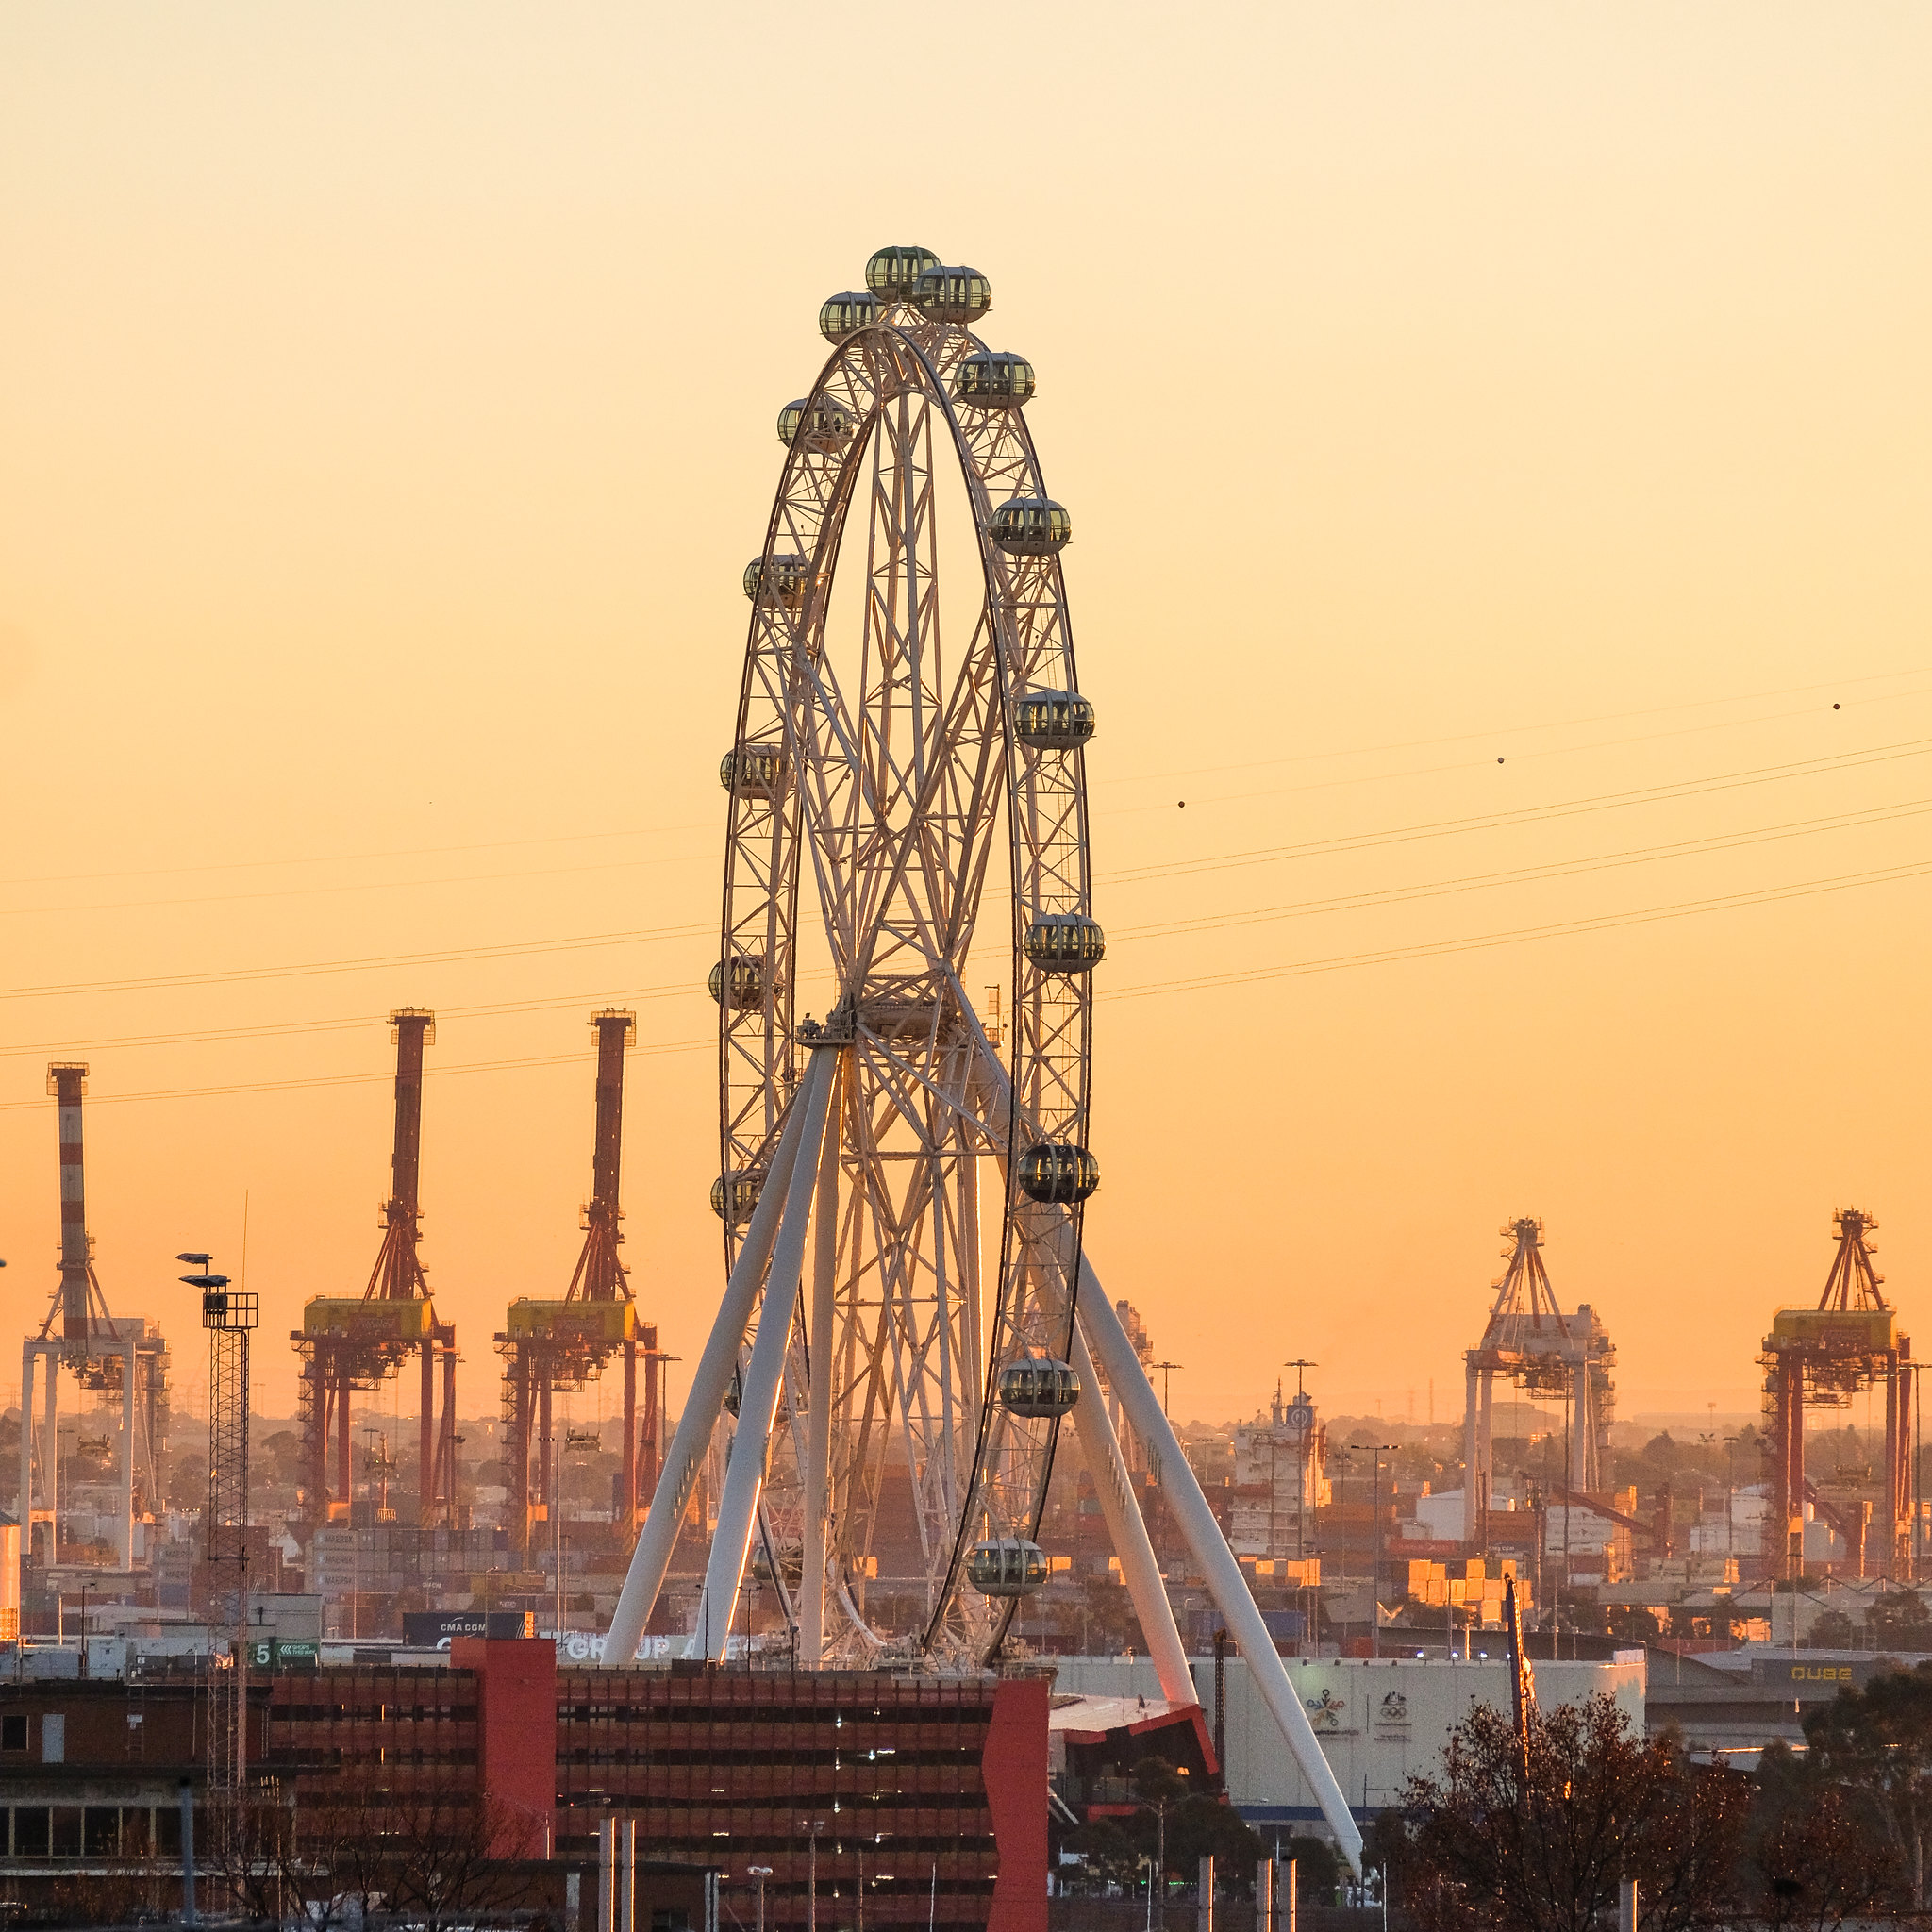 cities, sunset, city, ferris wheel, attraction, port wallpapers for tablet